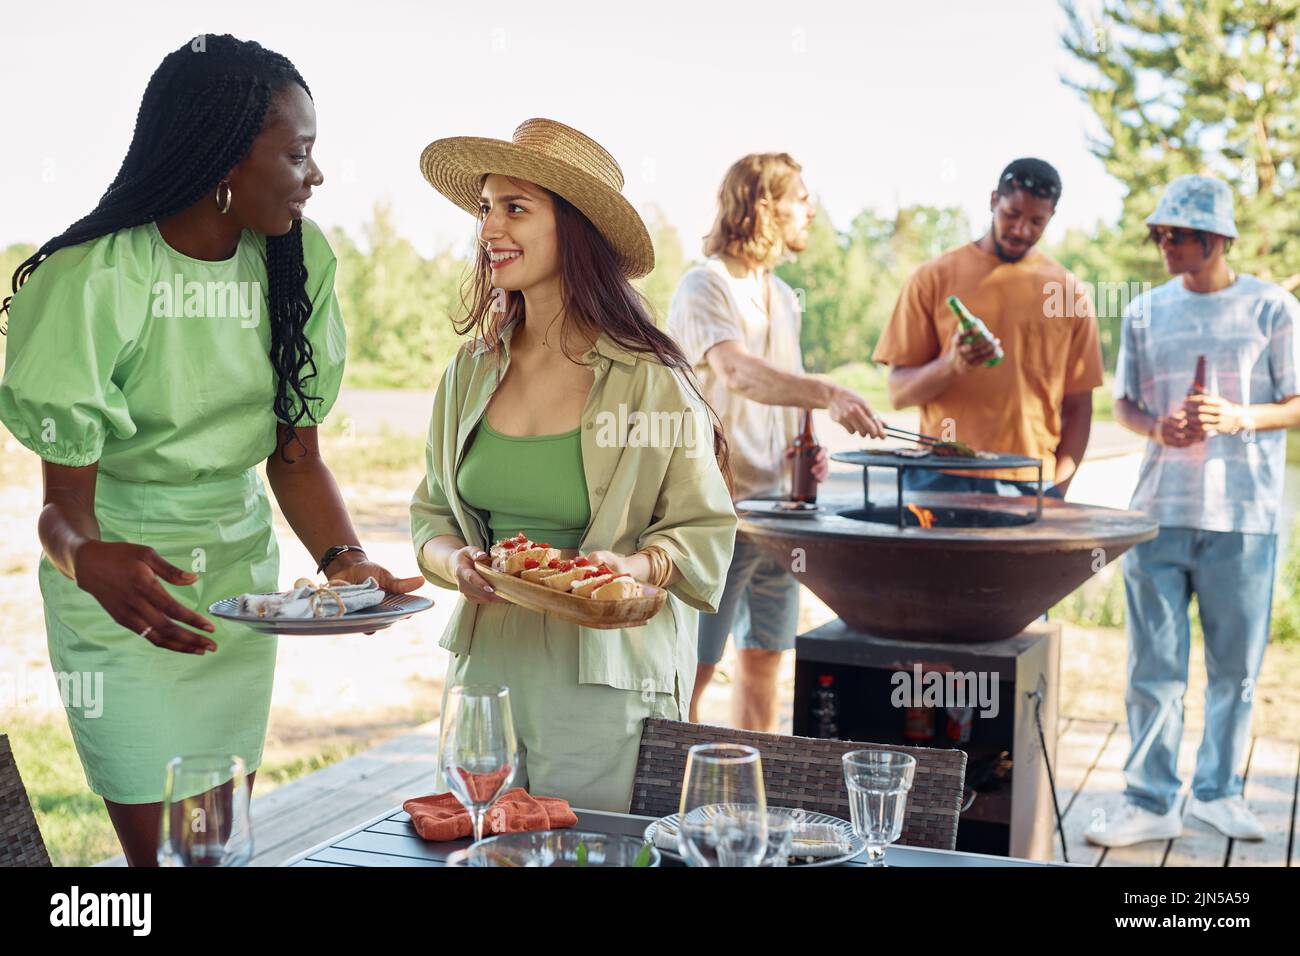 Diverse group of young people enjoying barbeque party outdoors in Sumer, focus on two smiling women serving food, copy space Stock Photo